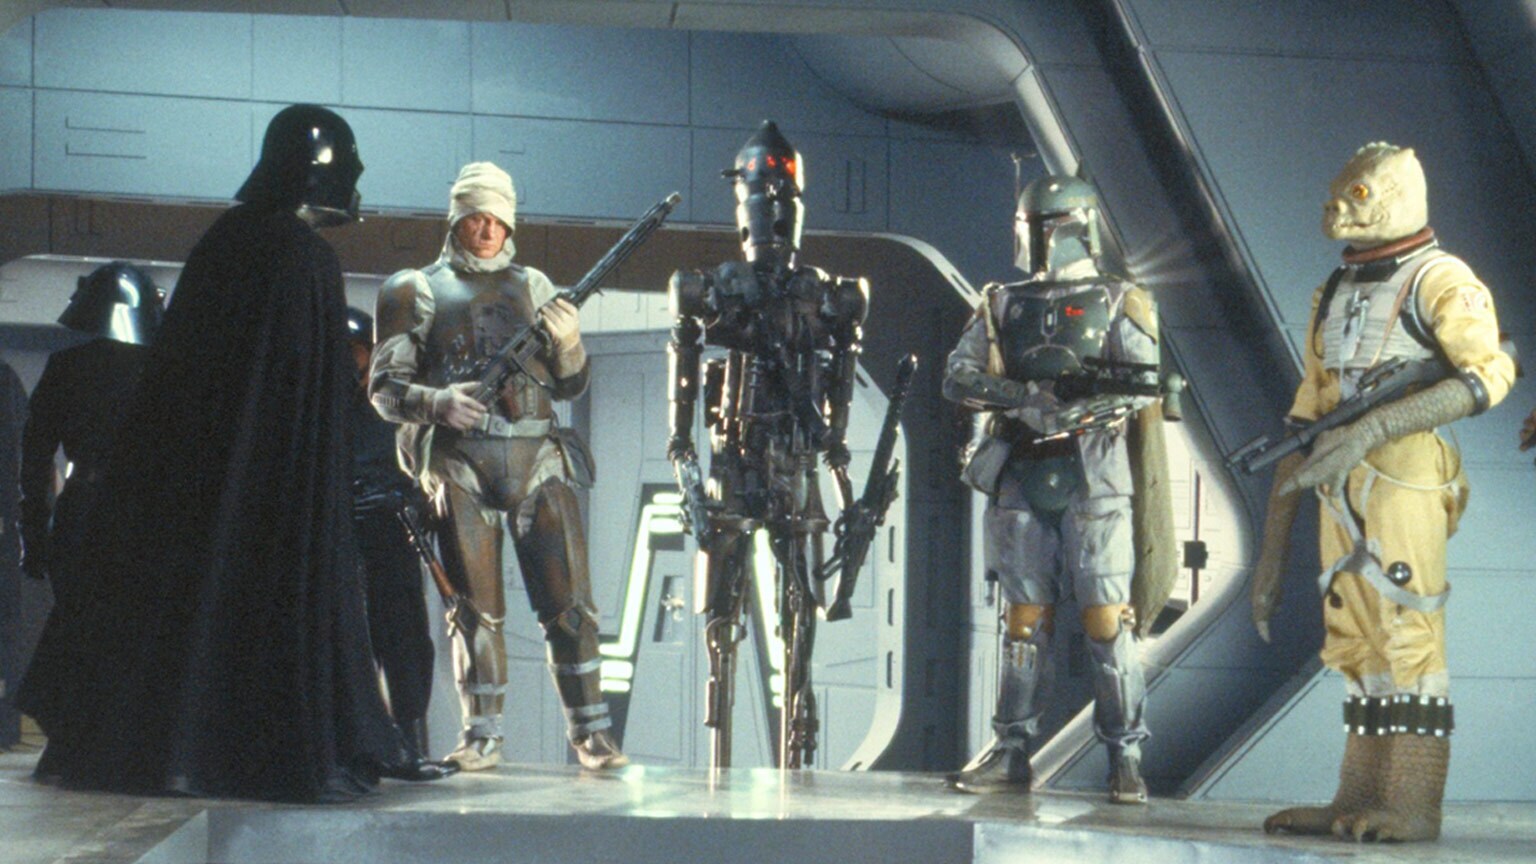 Quiz: Which Bounty Hunter Should You Invite for Thanksgiving?